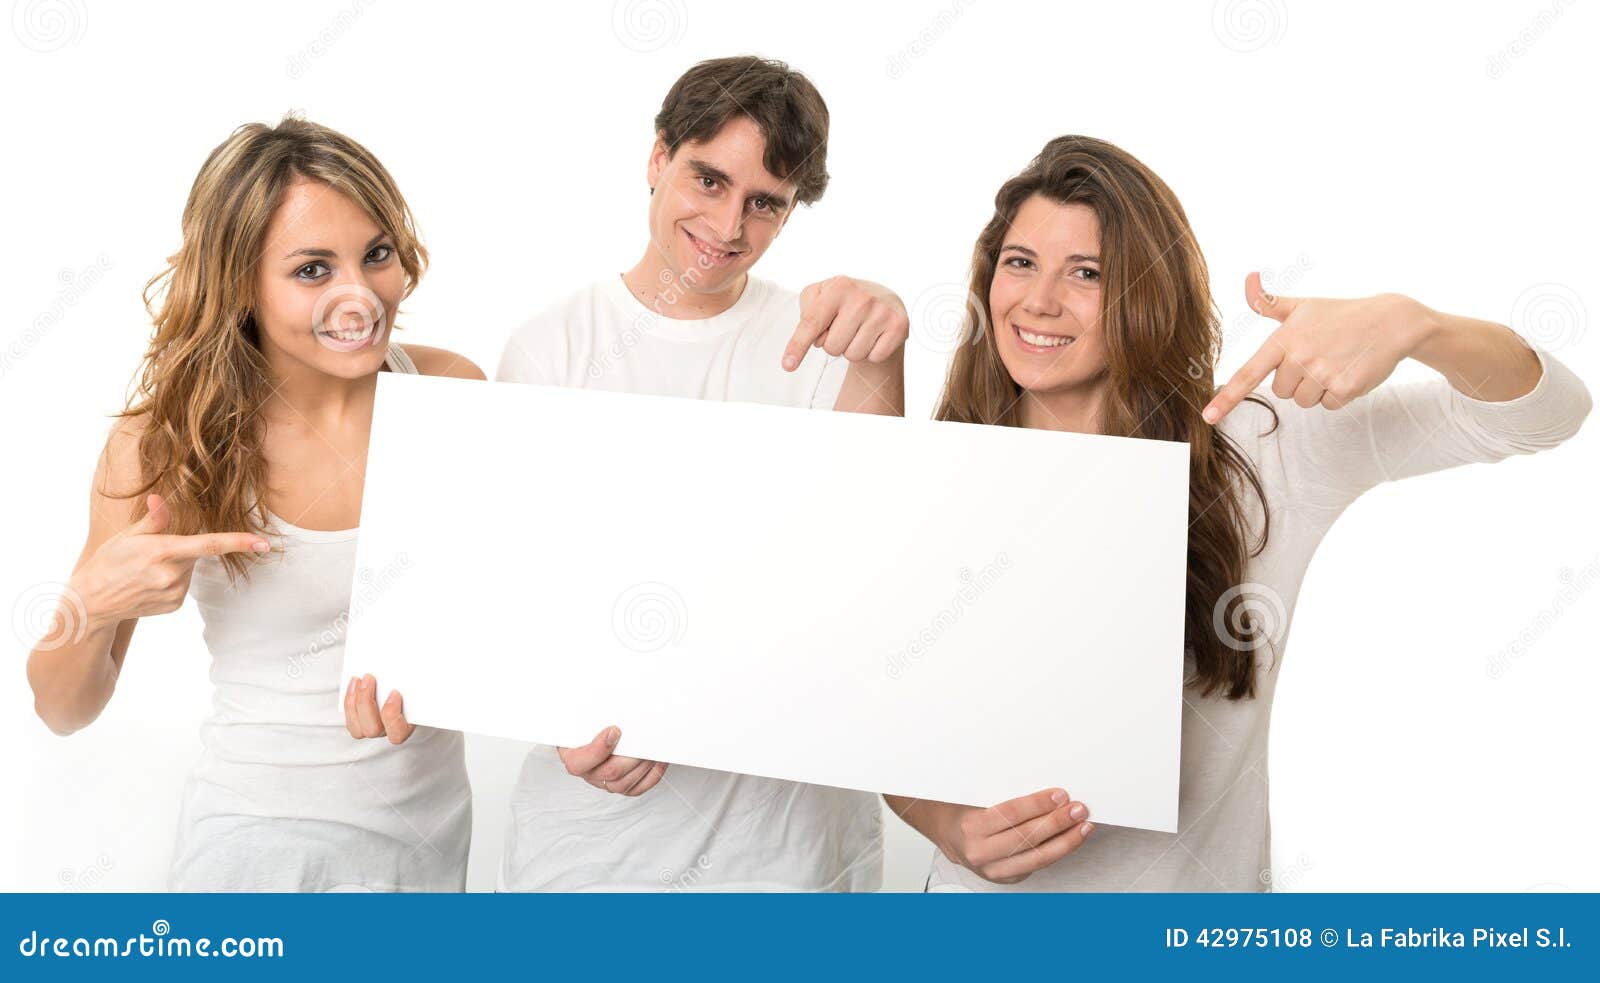 Youth message stock photo. Image of signboard, holding - 42975108